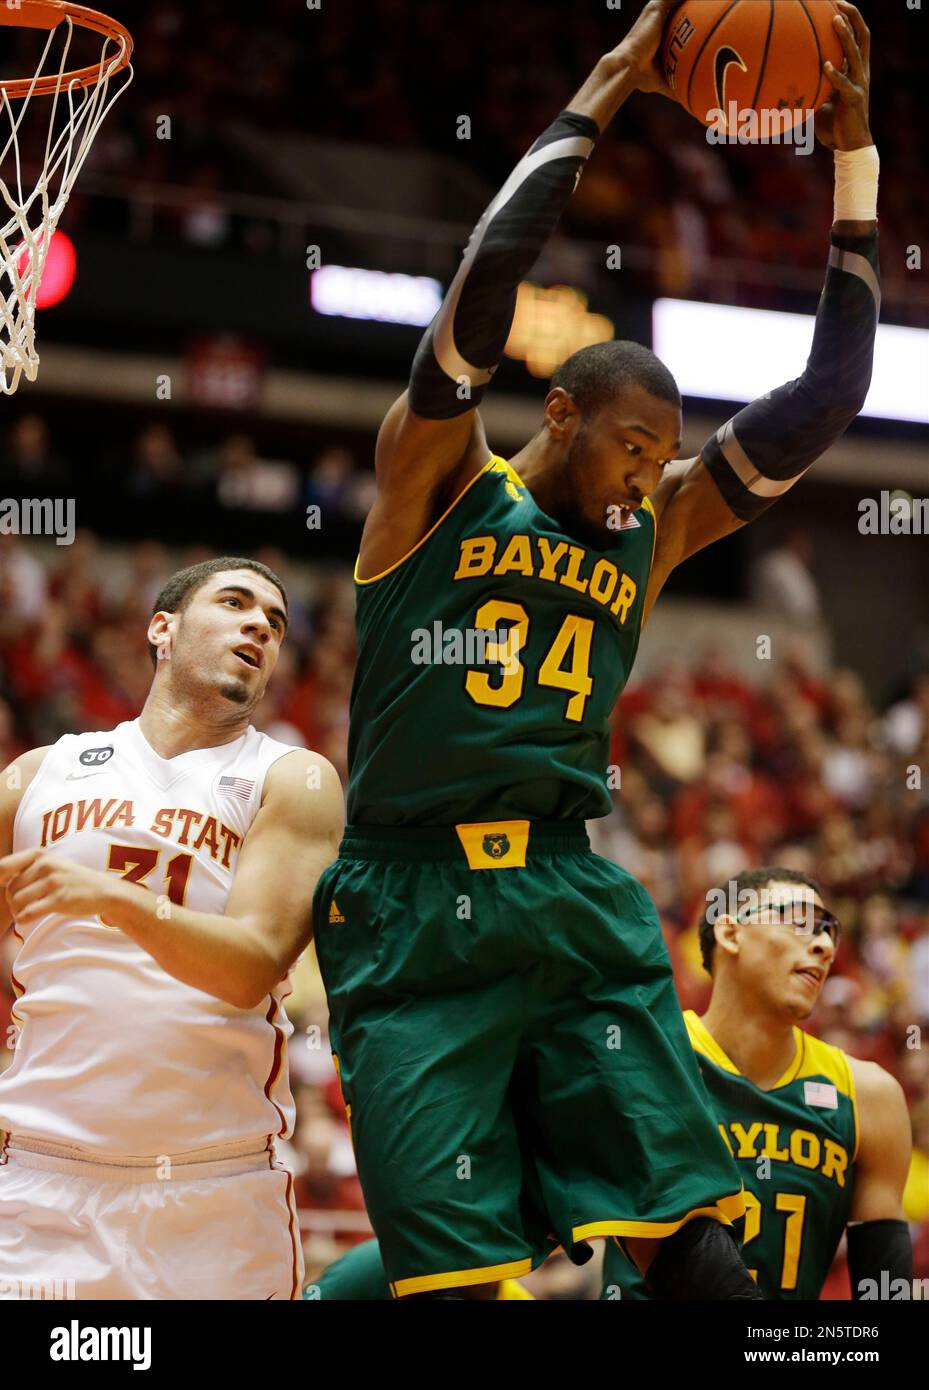 87 photos: Georges Niang at Iowa State